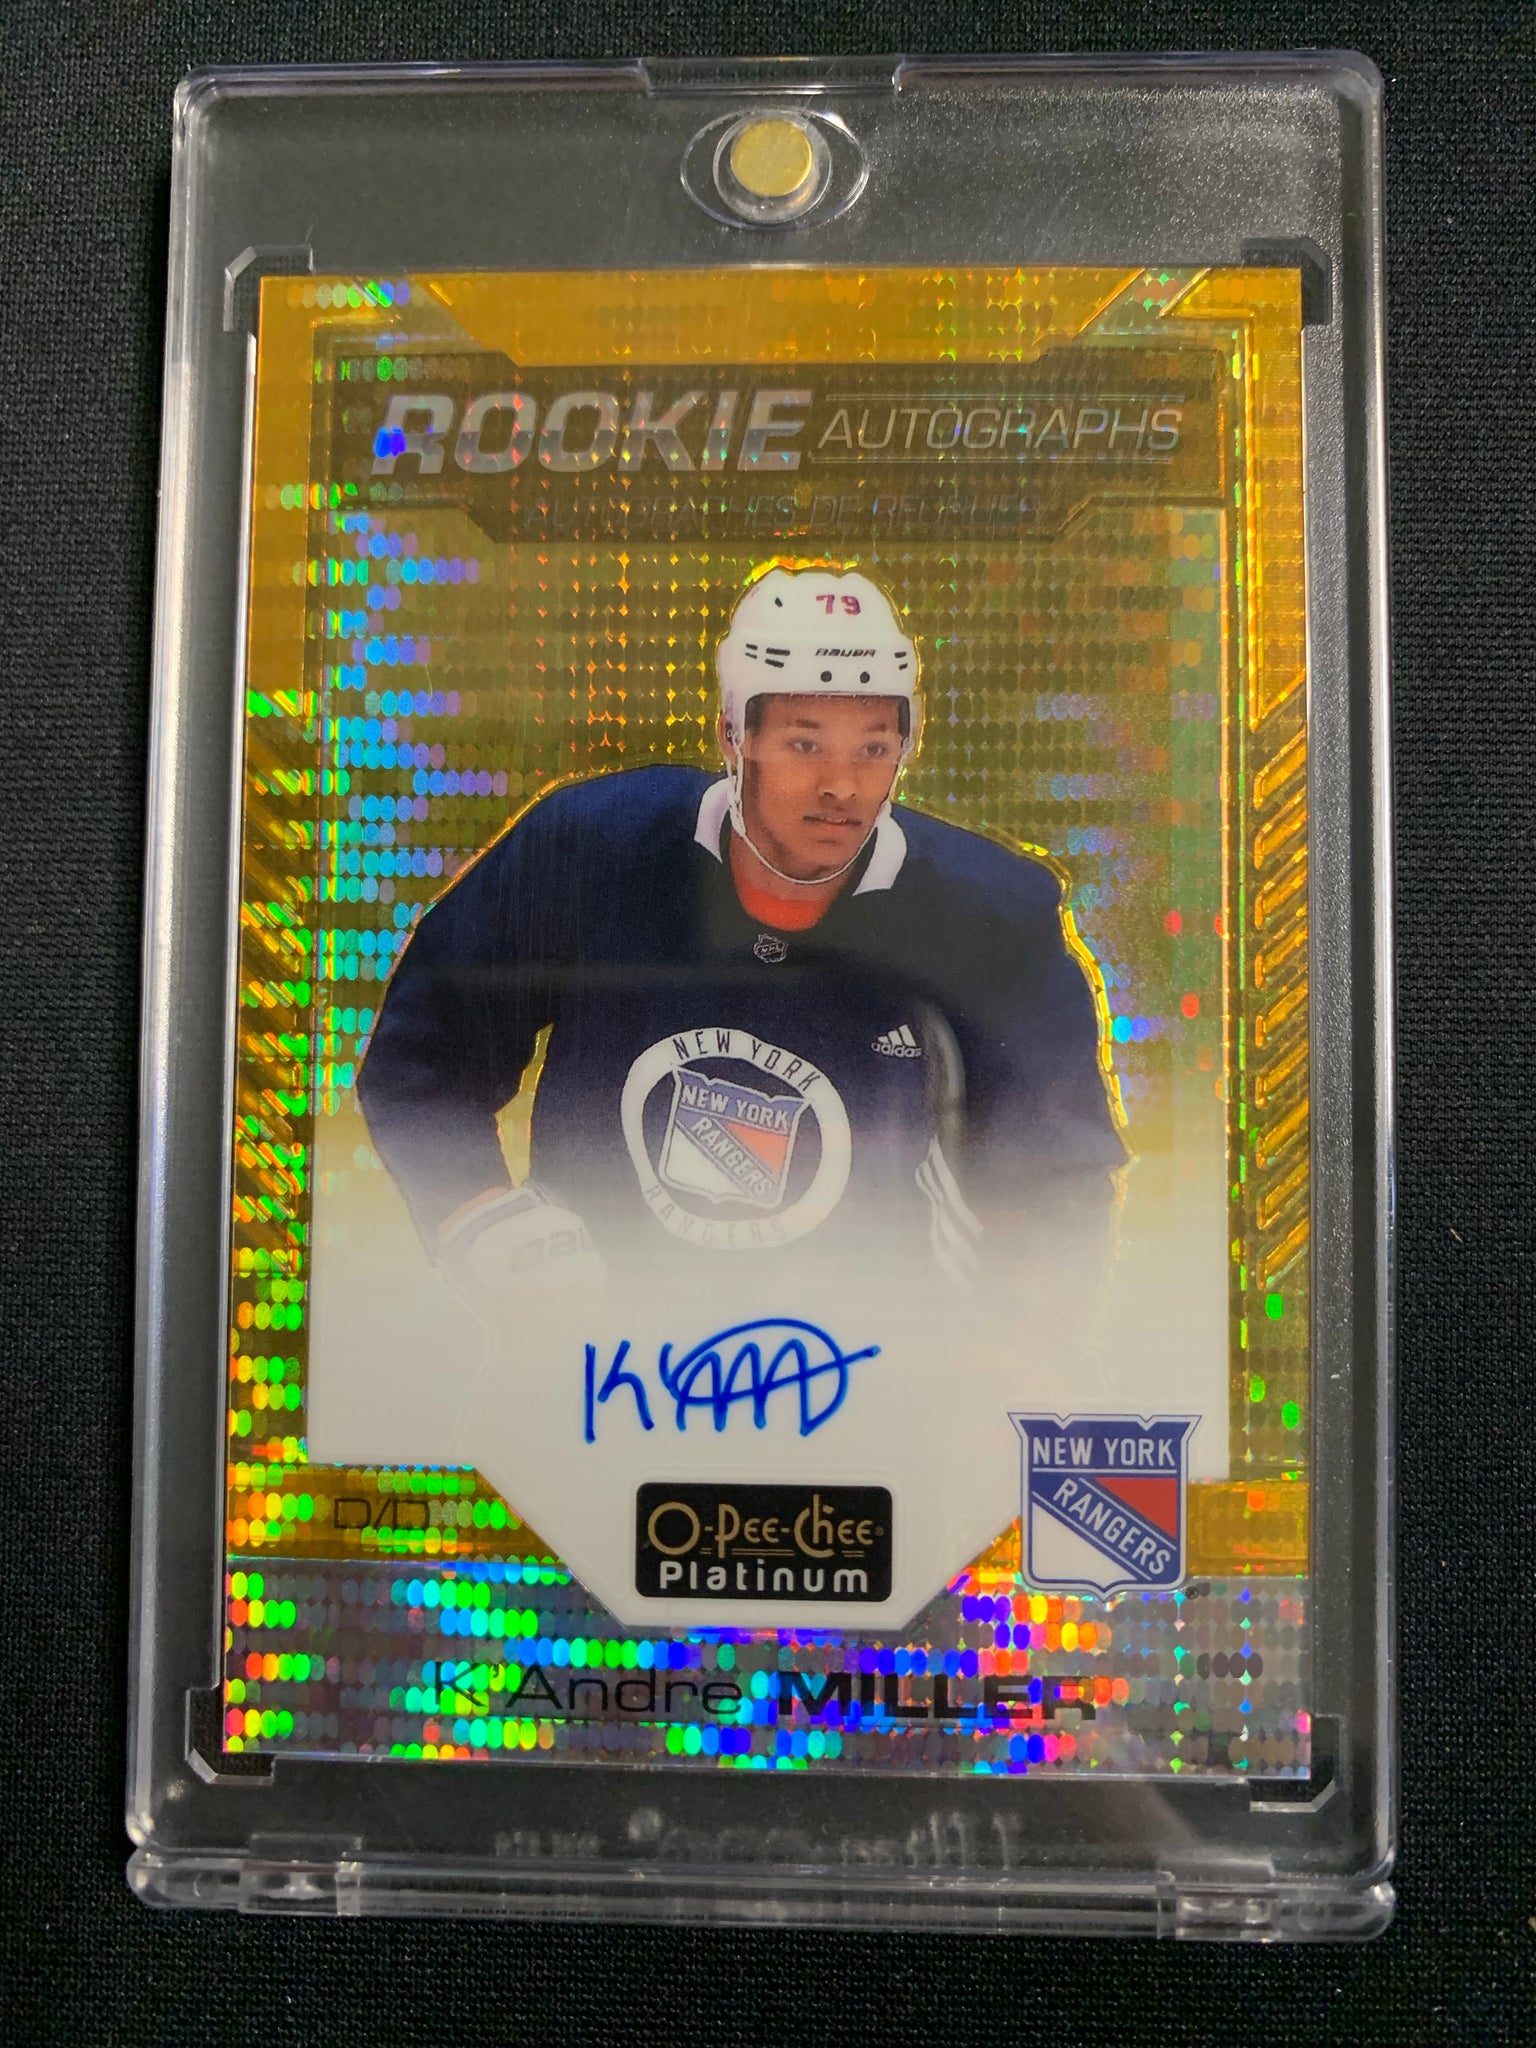 2020-21 UD O-PEE-CHEE PLATINUM HOCKEY #R-KM NEW YORK RANGERS - K'ANDRE MILLER SEISMIC GOLD ROOKIE AUTOGRAPHS NUMBERED 22/25